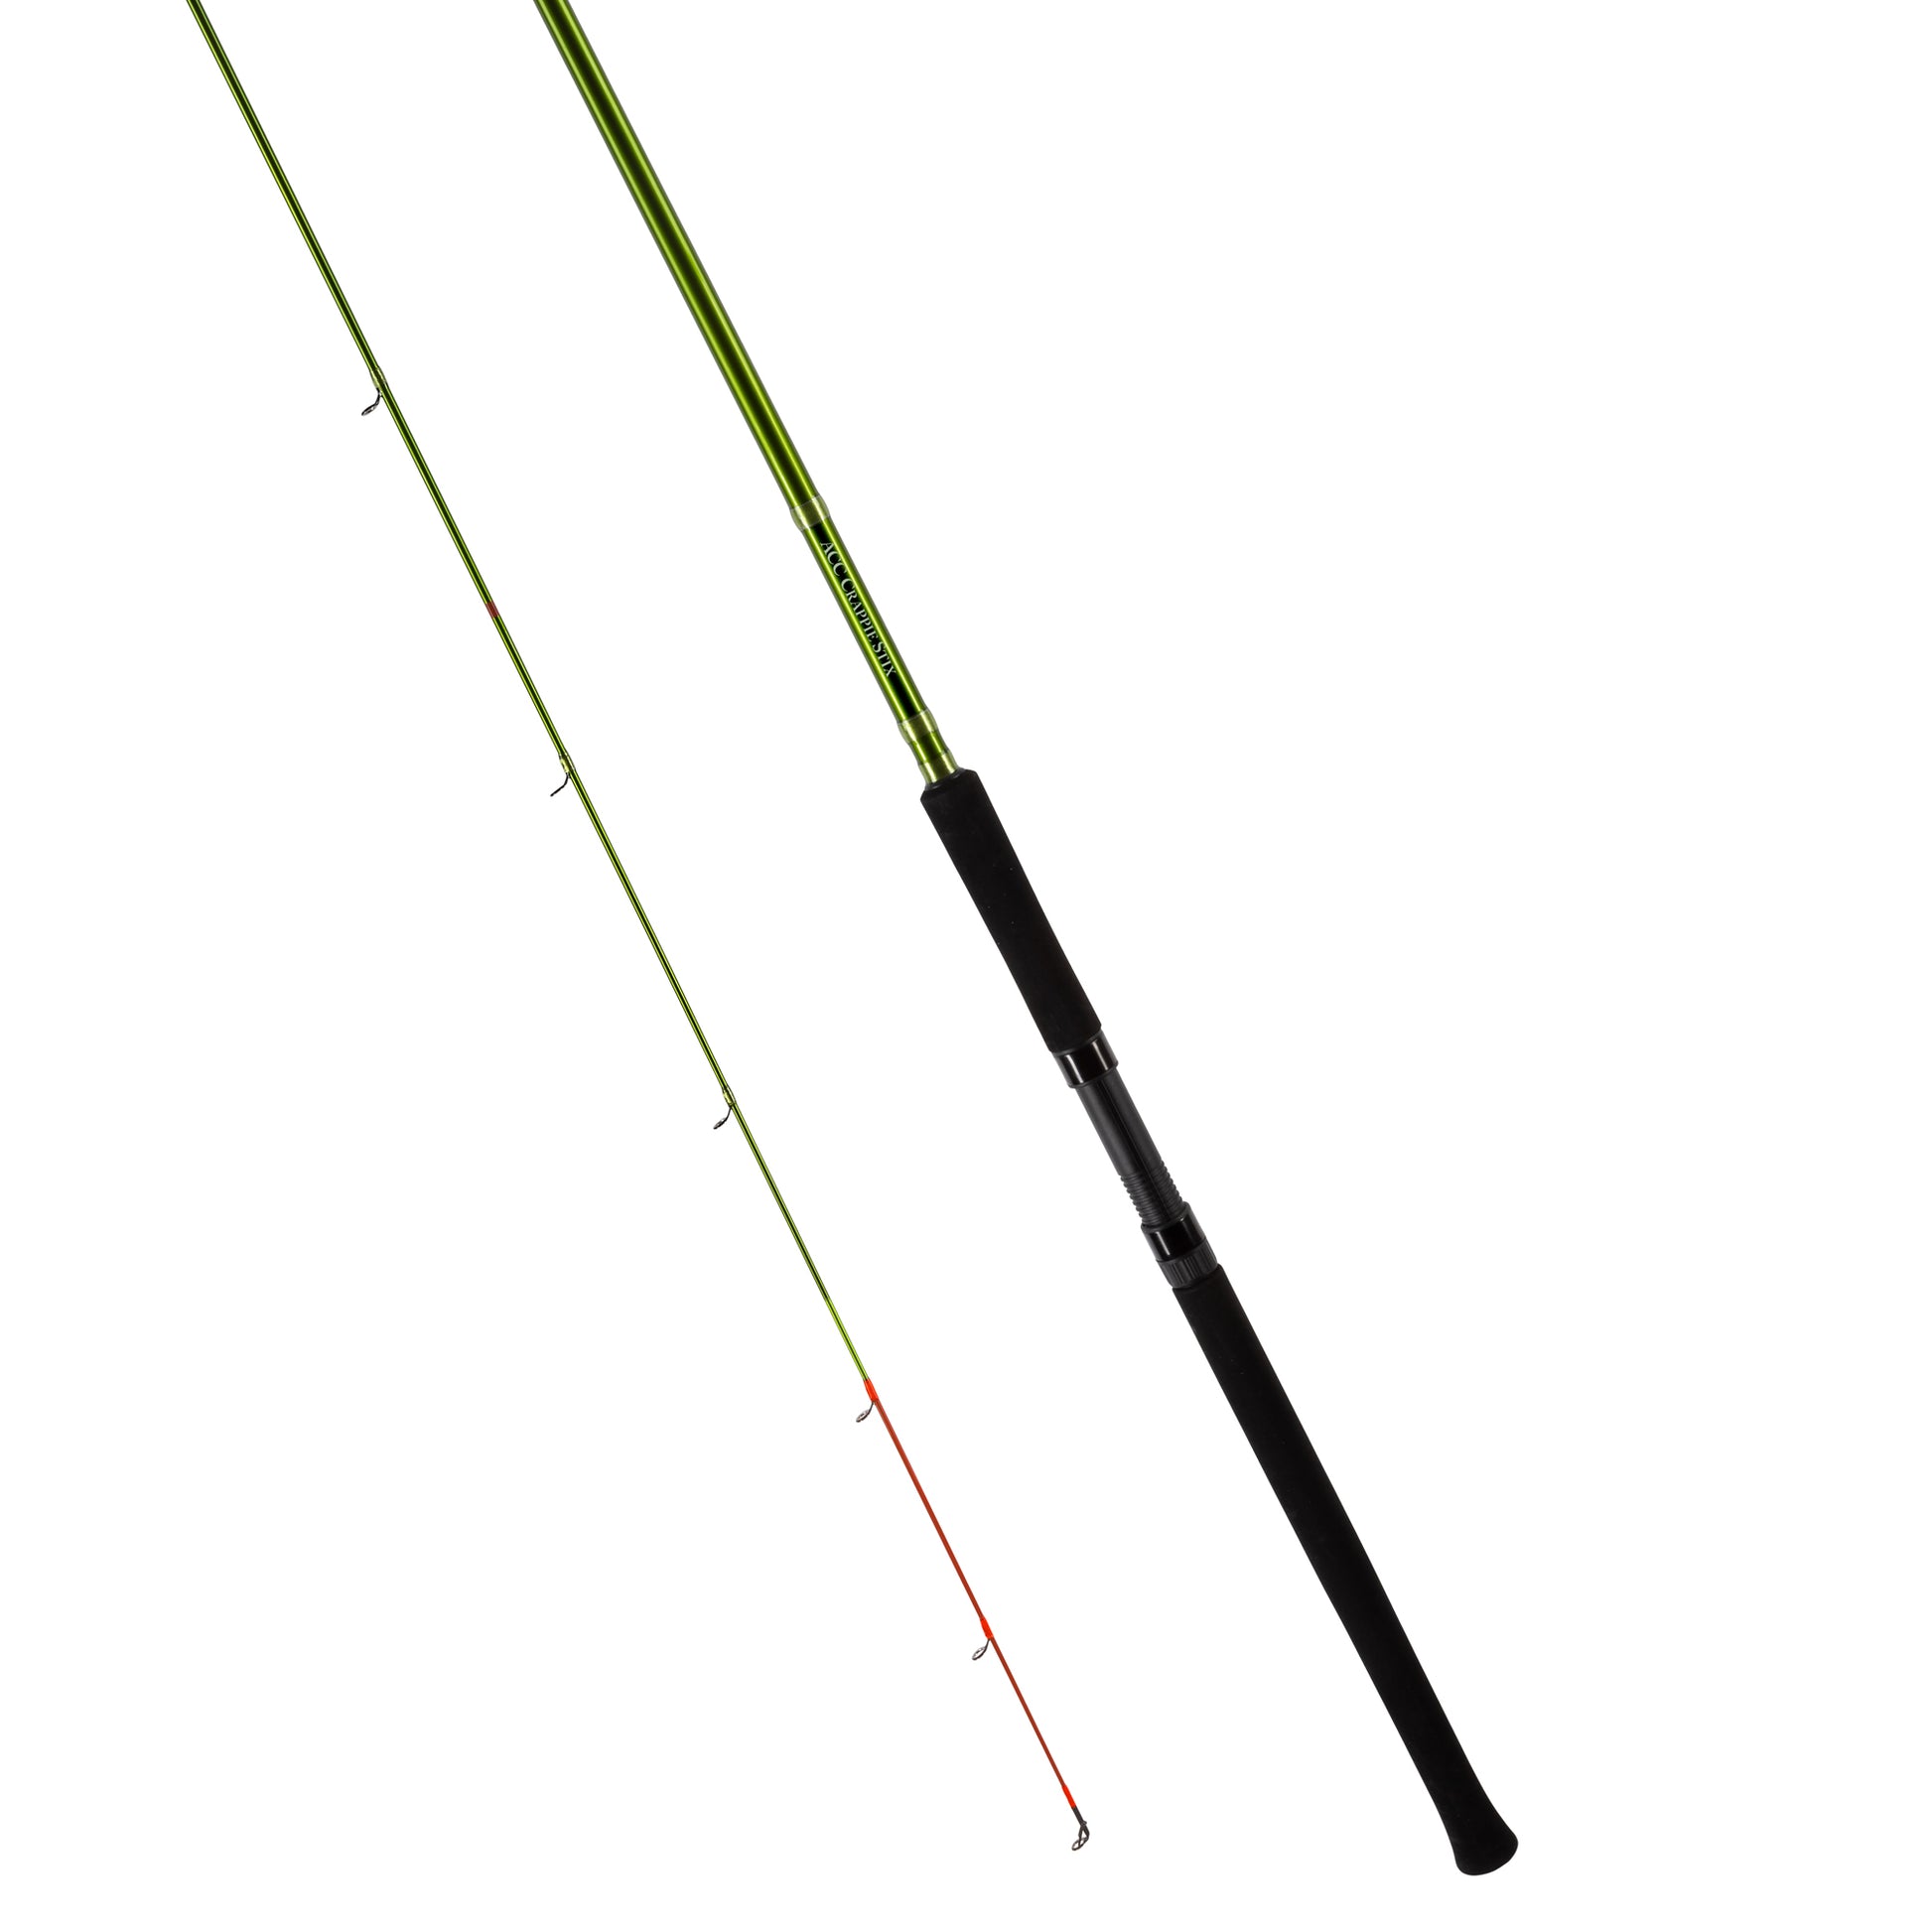 ACC Crappie Stix Green Series Trolling Rods – Lures and Lead